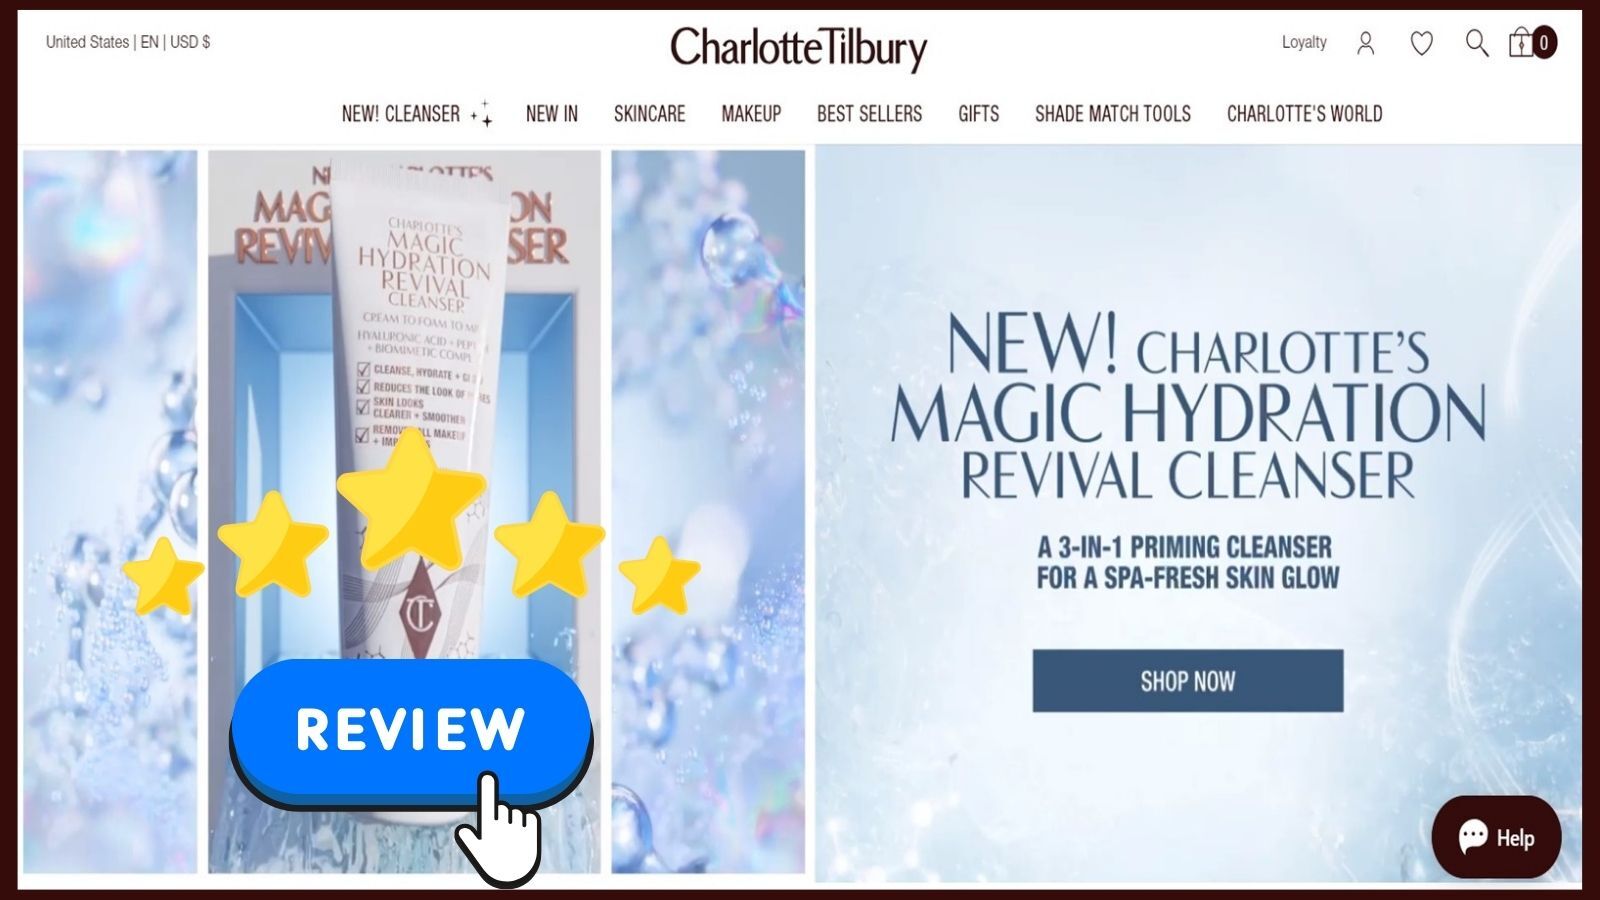 Charlotte Tilbury Review: Is It Suitable for Your Skin?